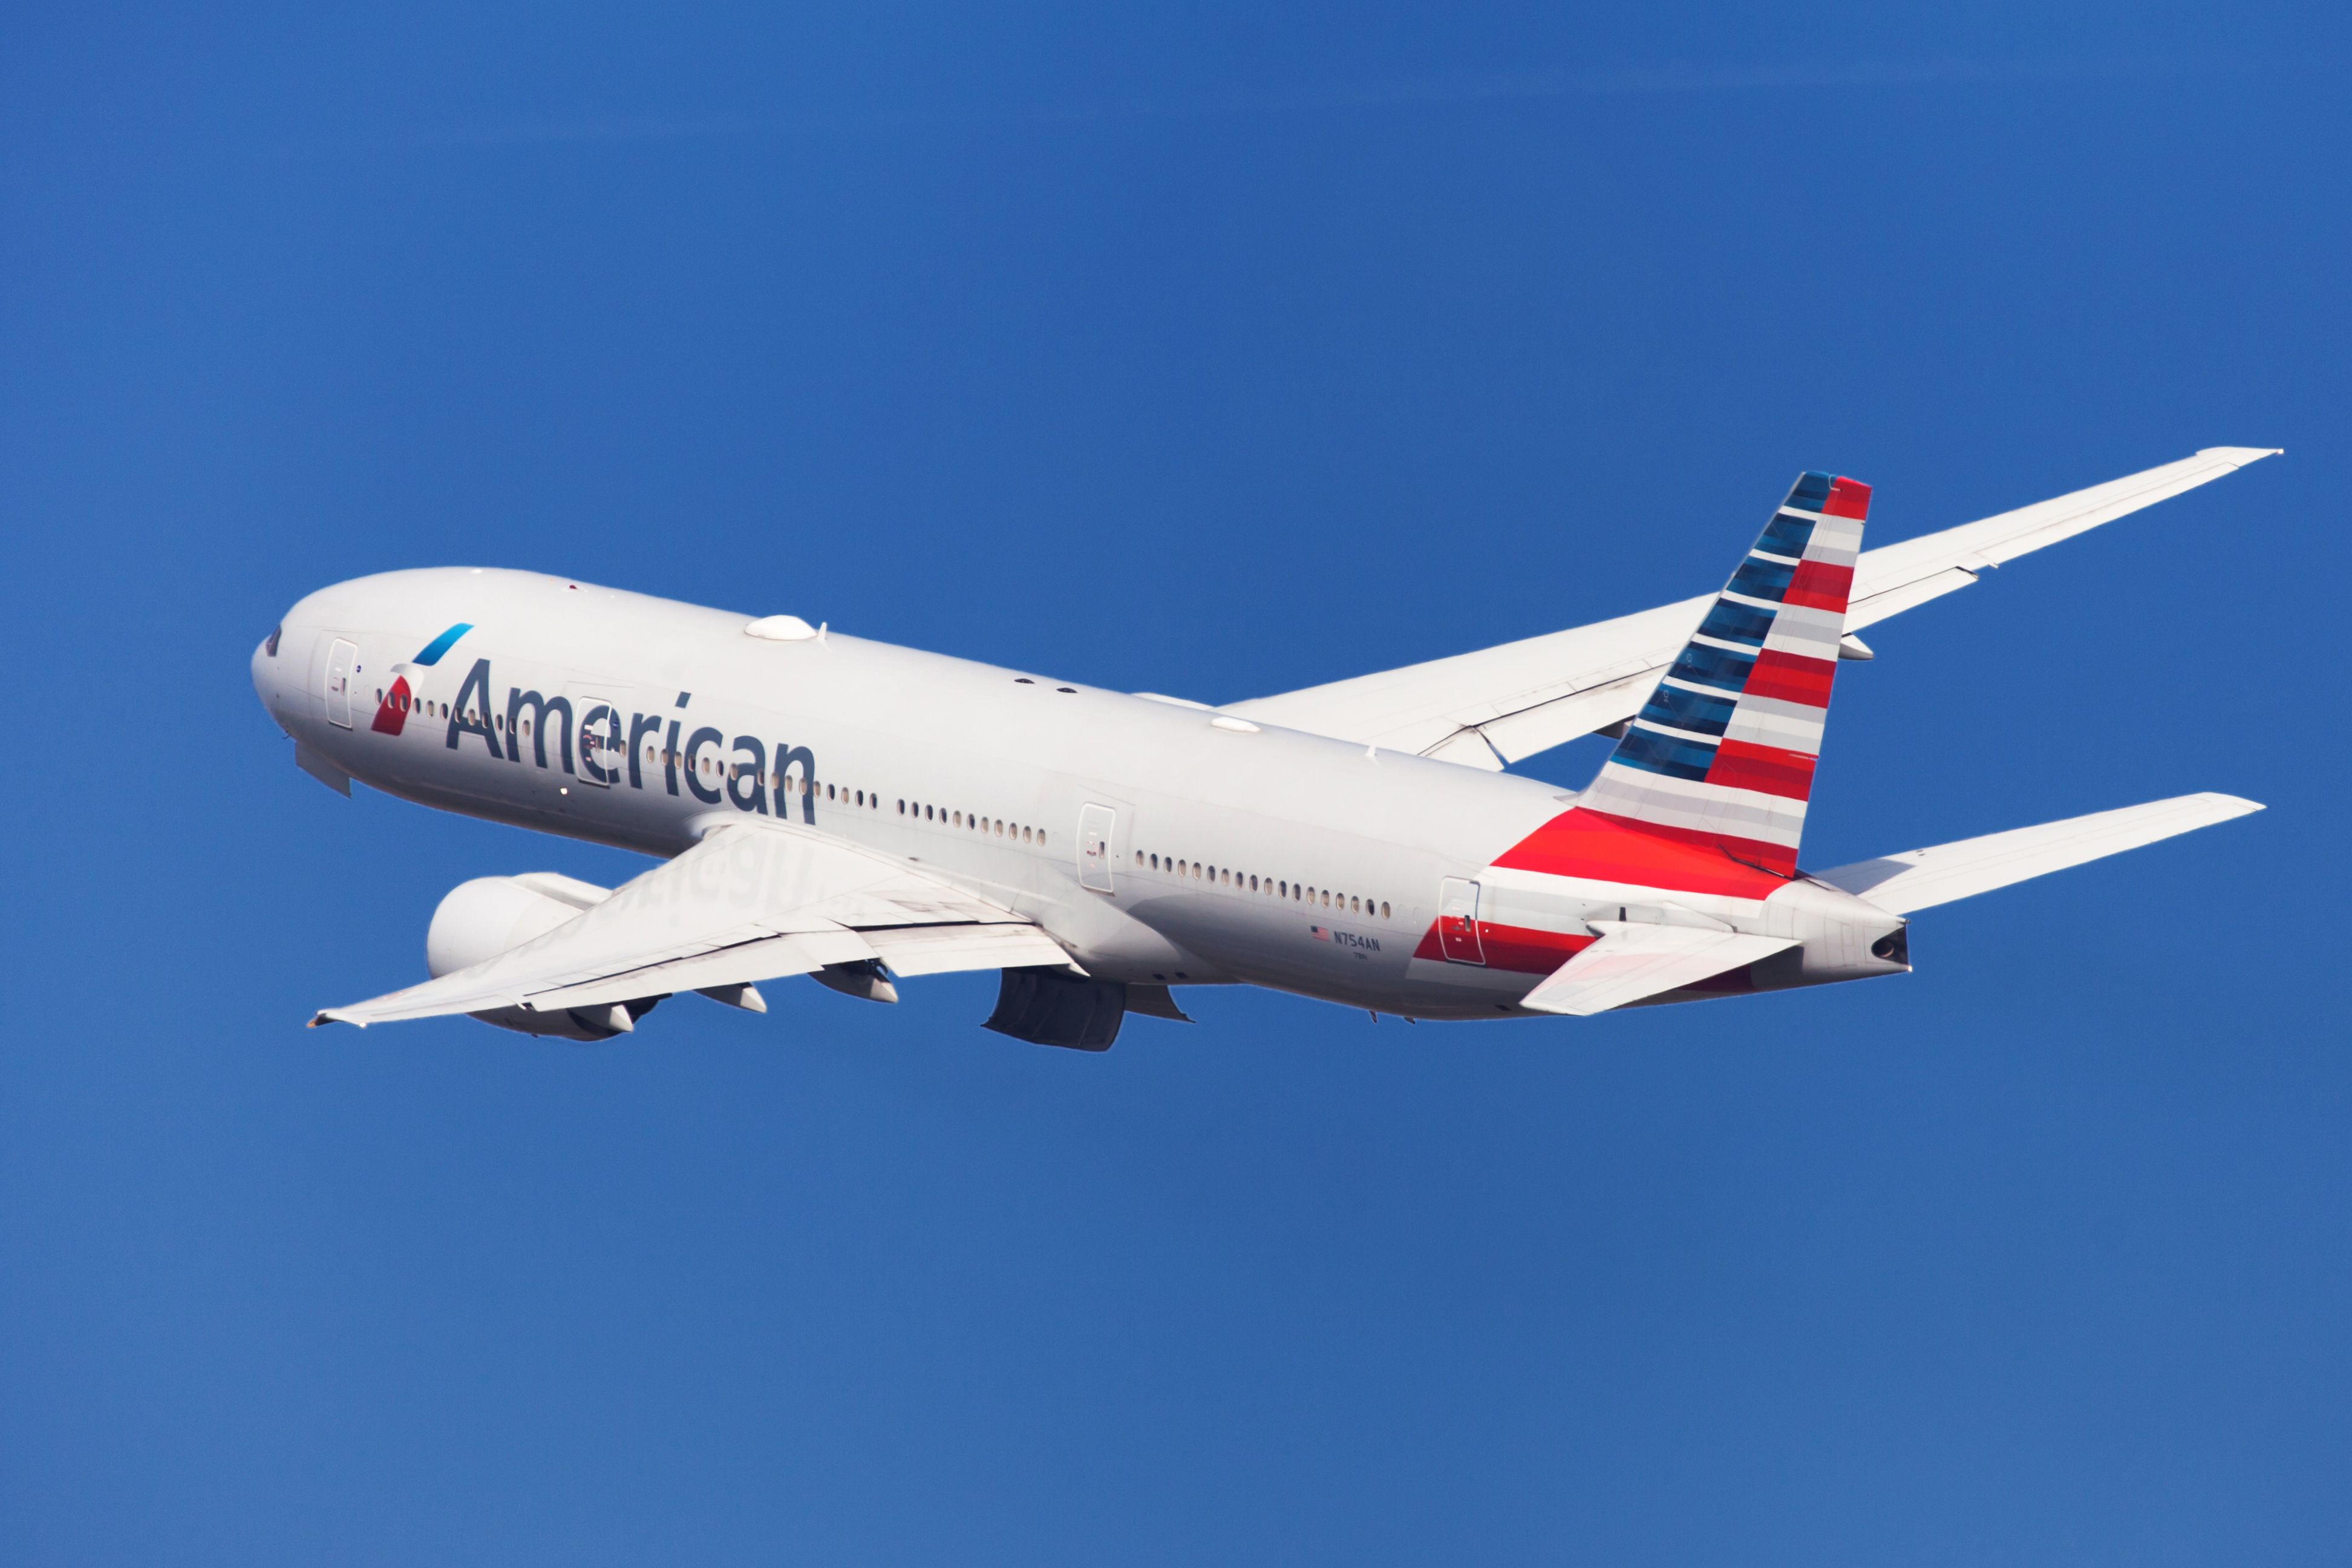 An American Airlines Boeing 777-200ER flying in the sky.